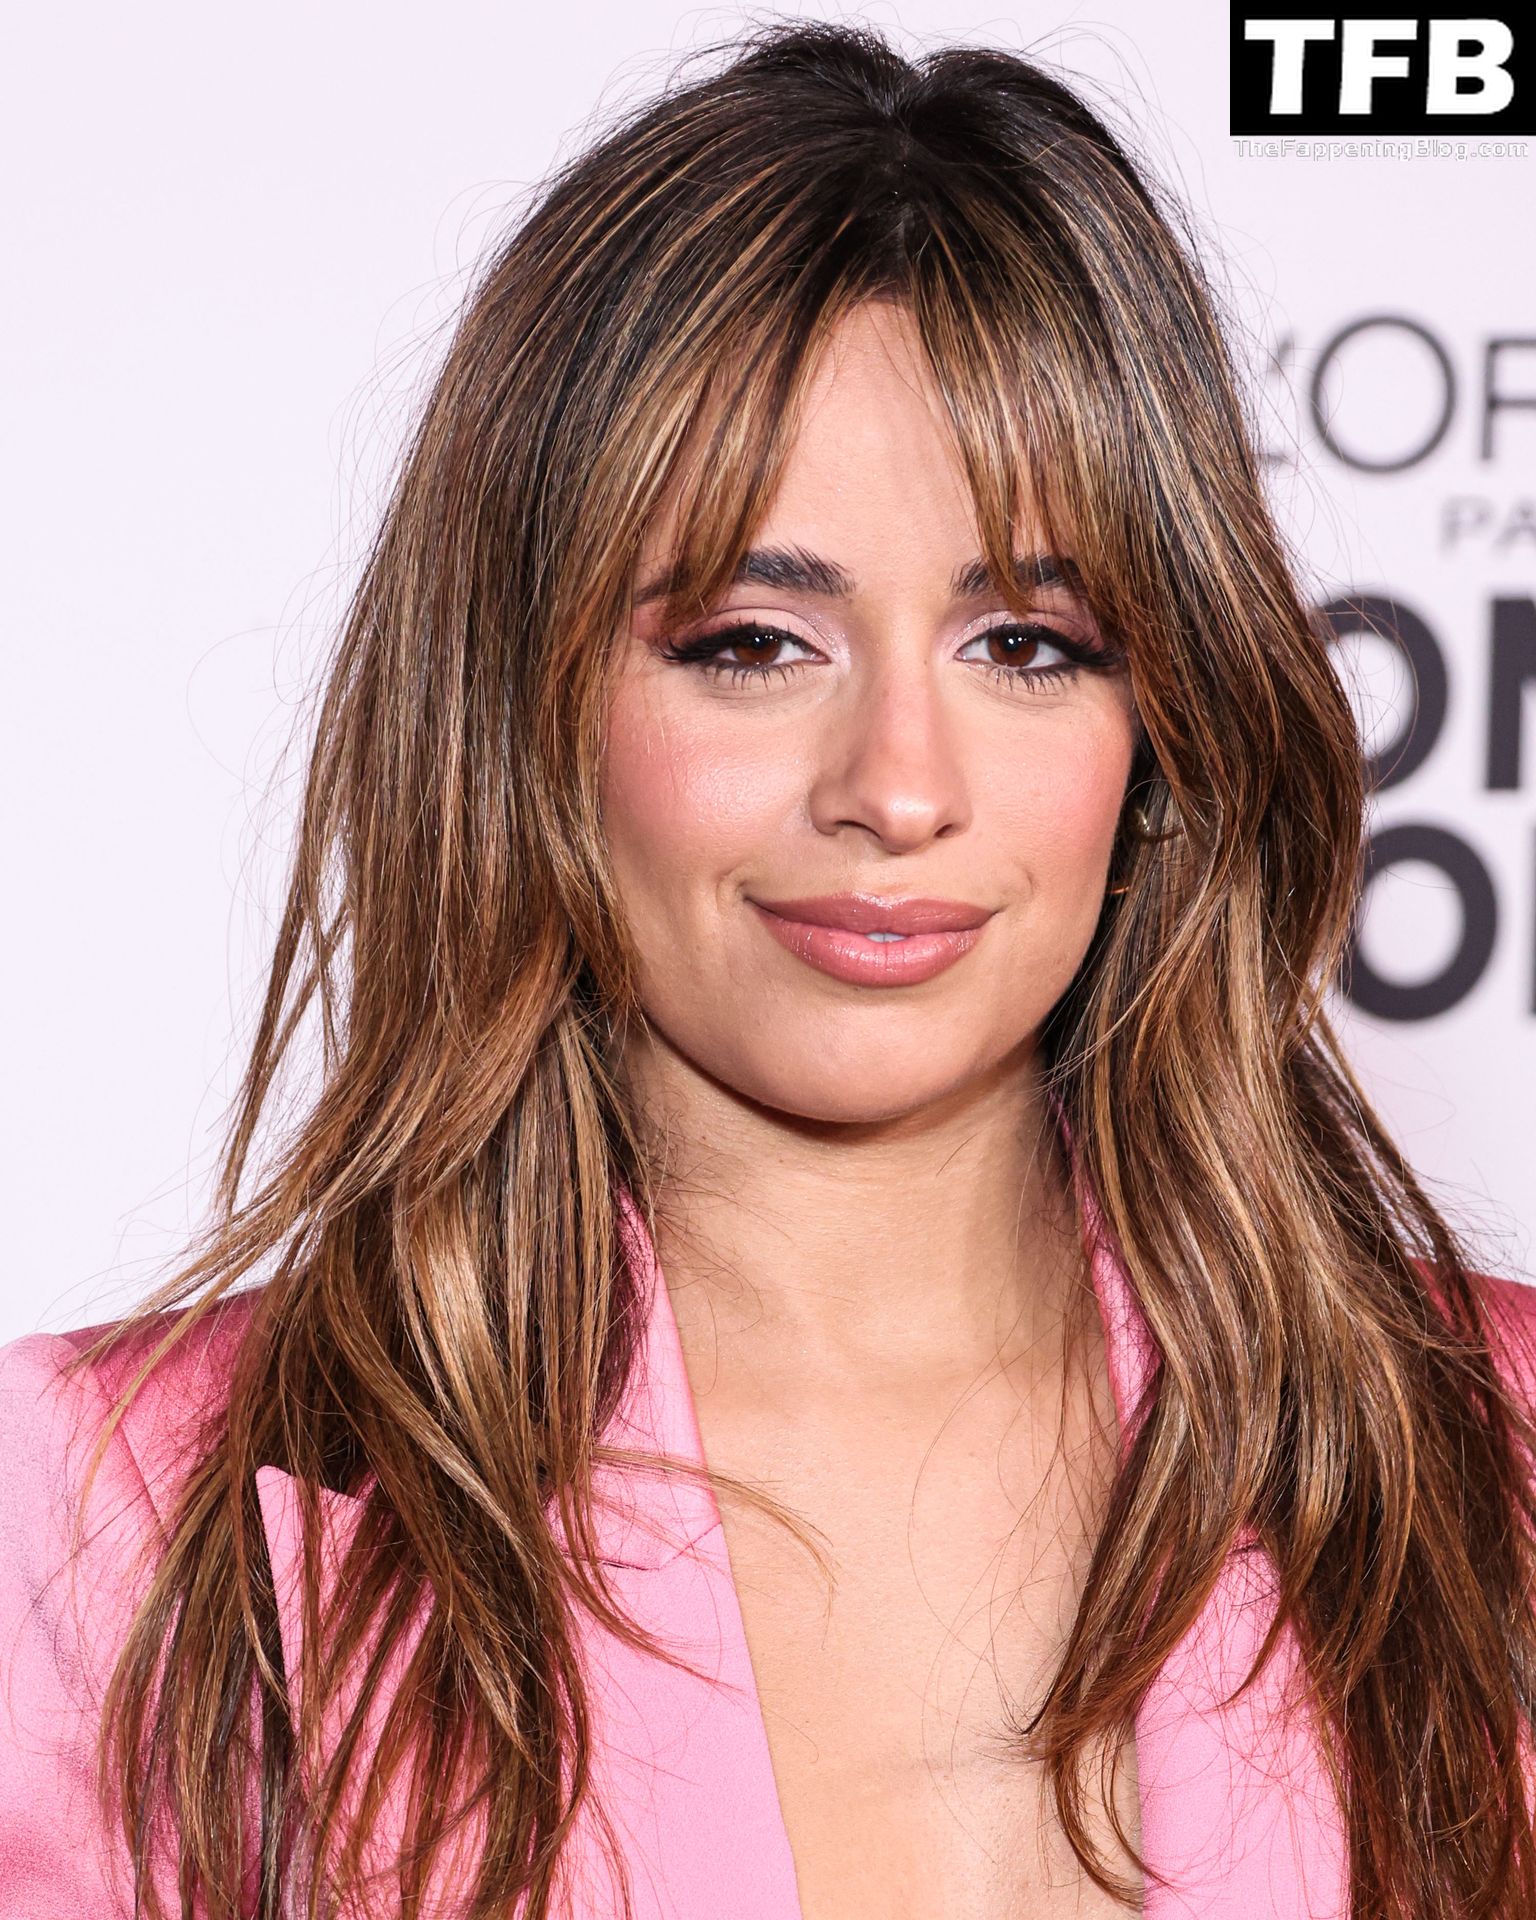 Camila Cabello Looks Hot in Pink at L’Oreal Paris’ Women Of Worth Celebration in LA (50 Photos)